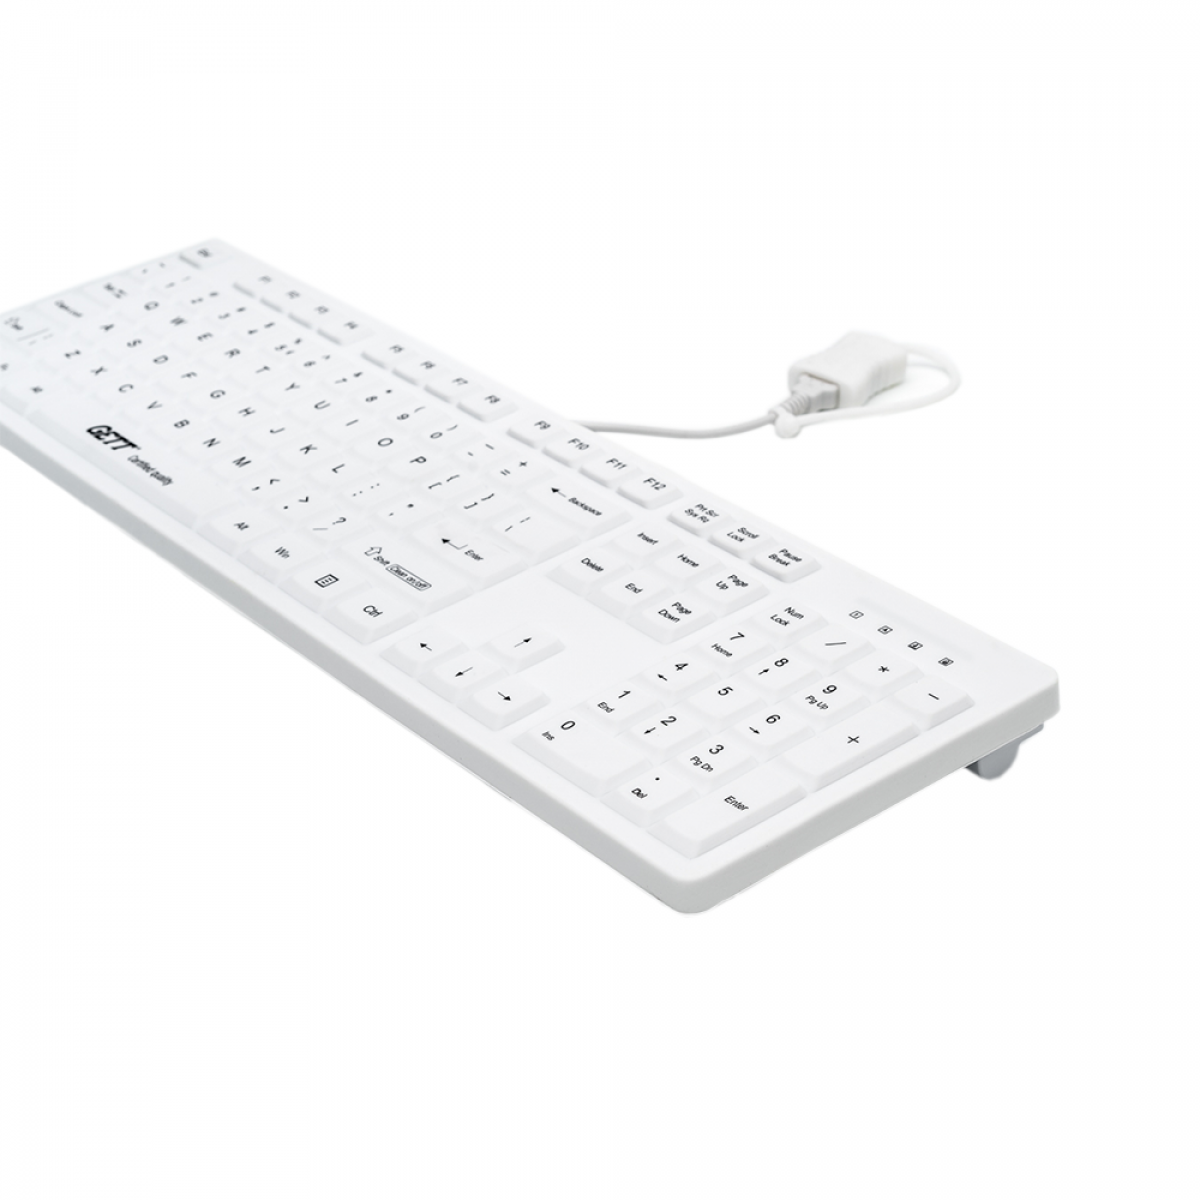 GETT CleanType Easy-Protect washable keyboard